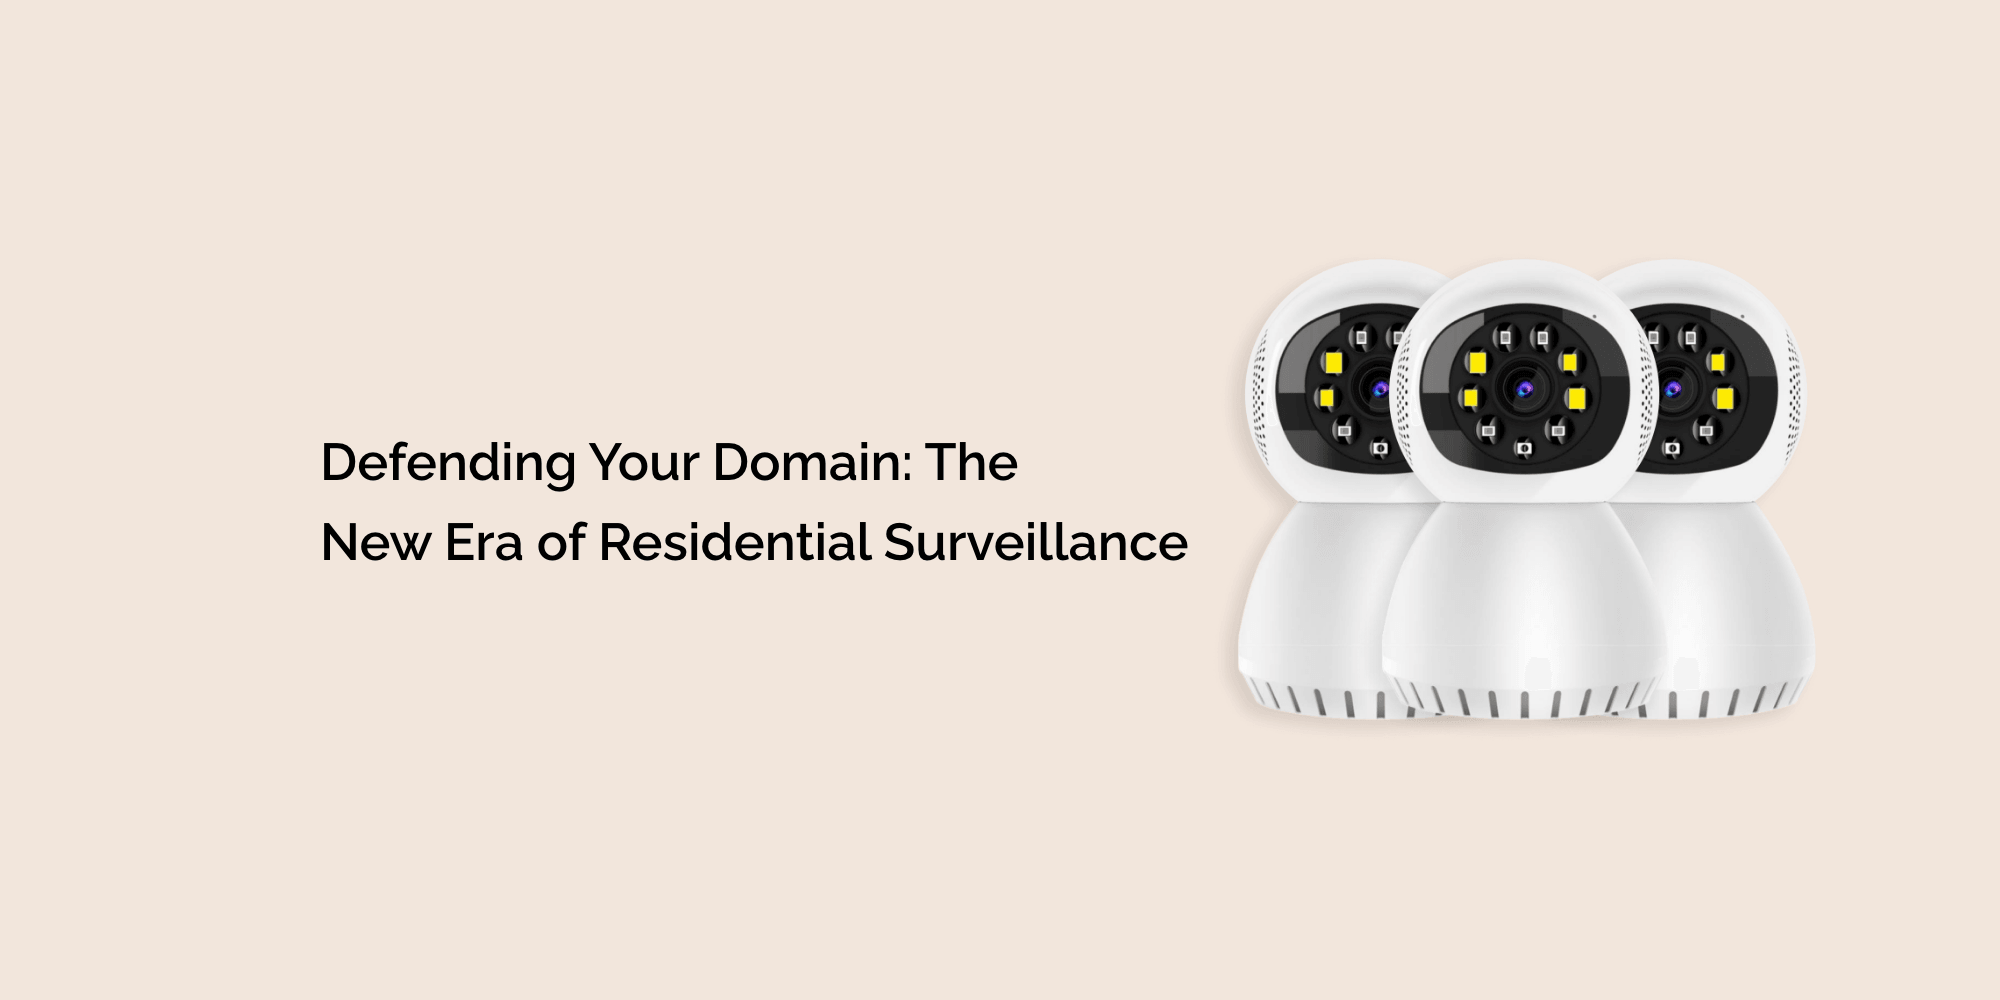 Defending Your Domain: The New Era of Residential Surveillance